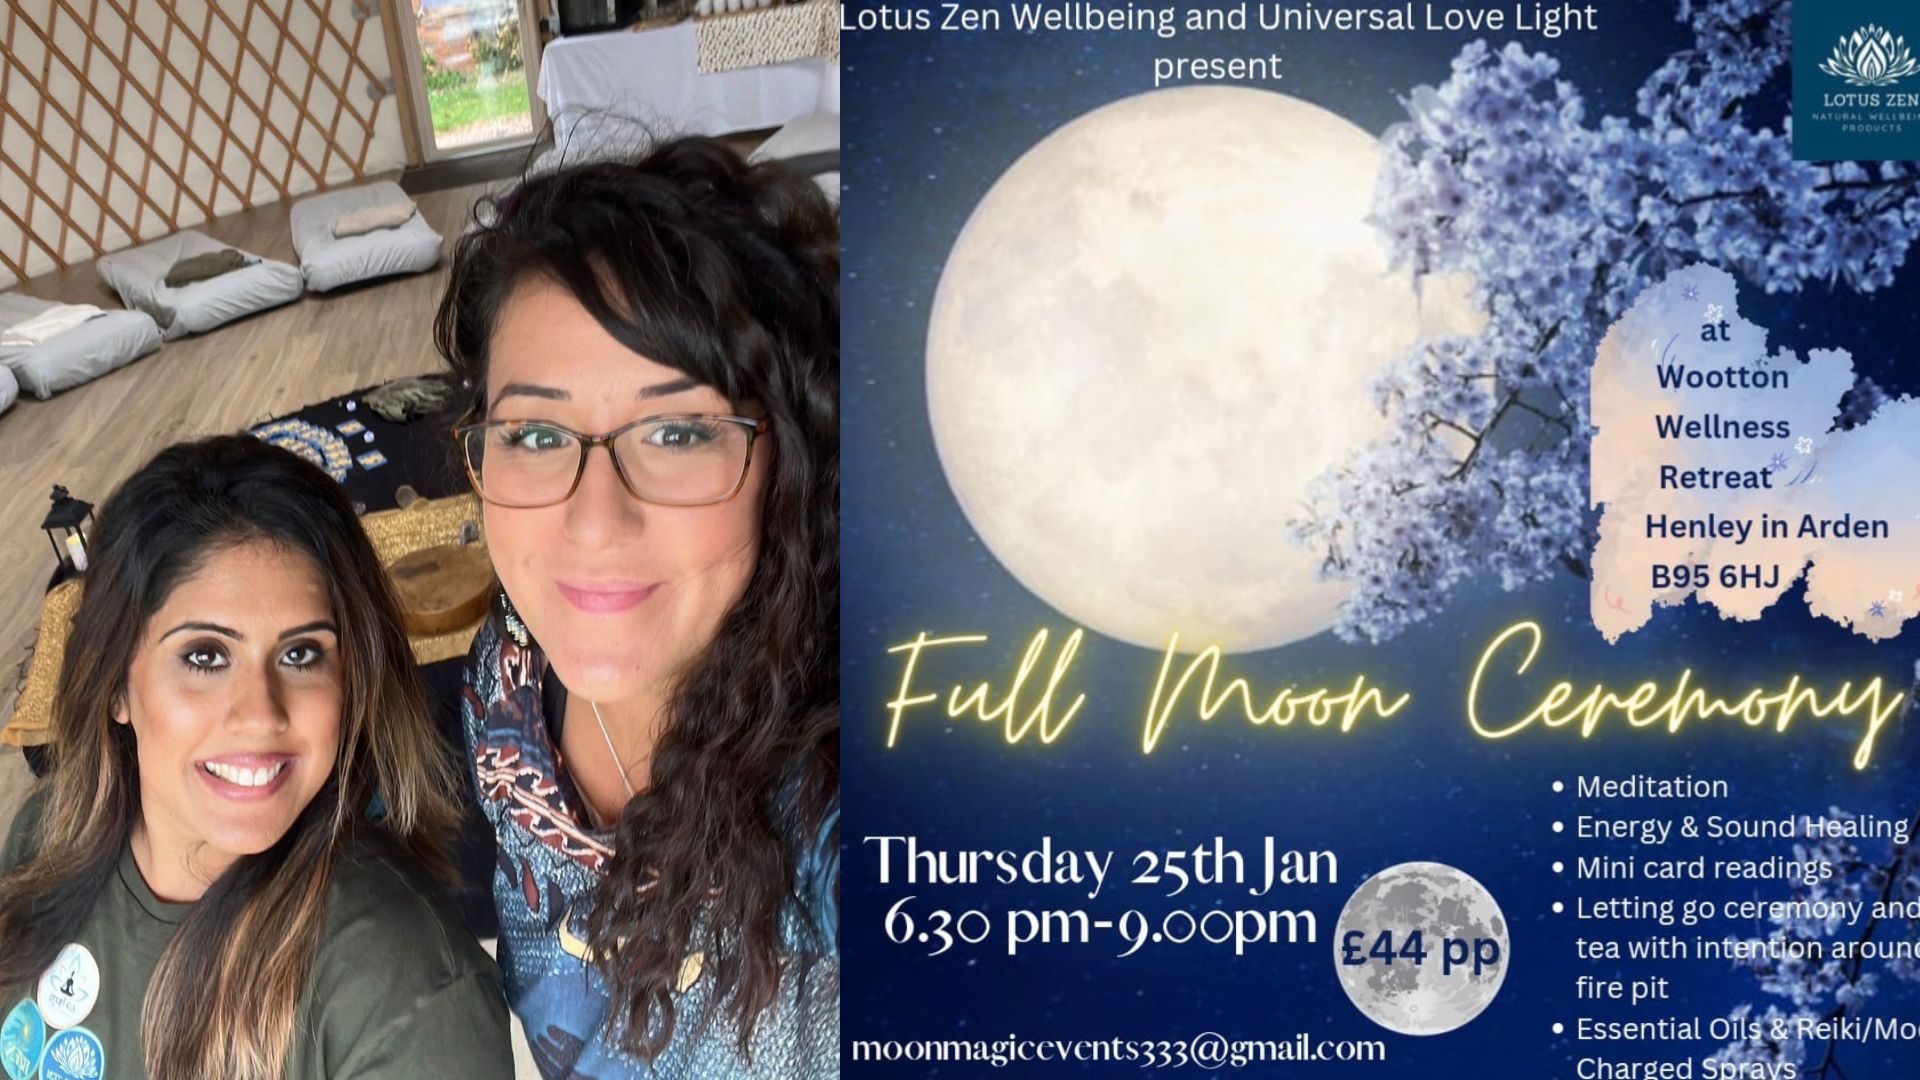 Full Moon Ceremony Evening Event with Universal Love Light & Lotus Zen Wellbeing